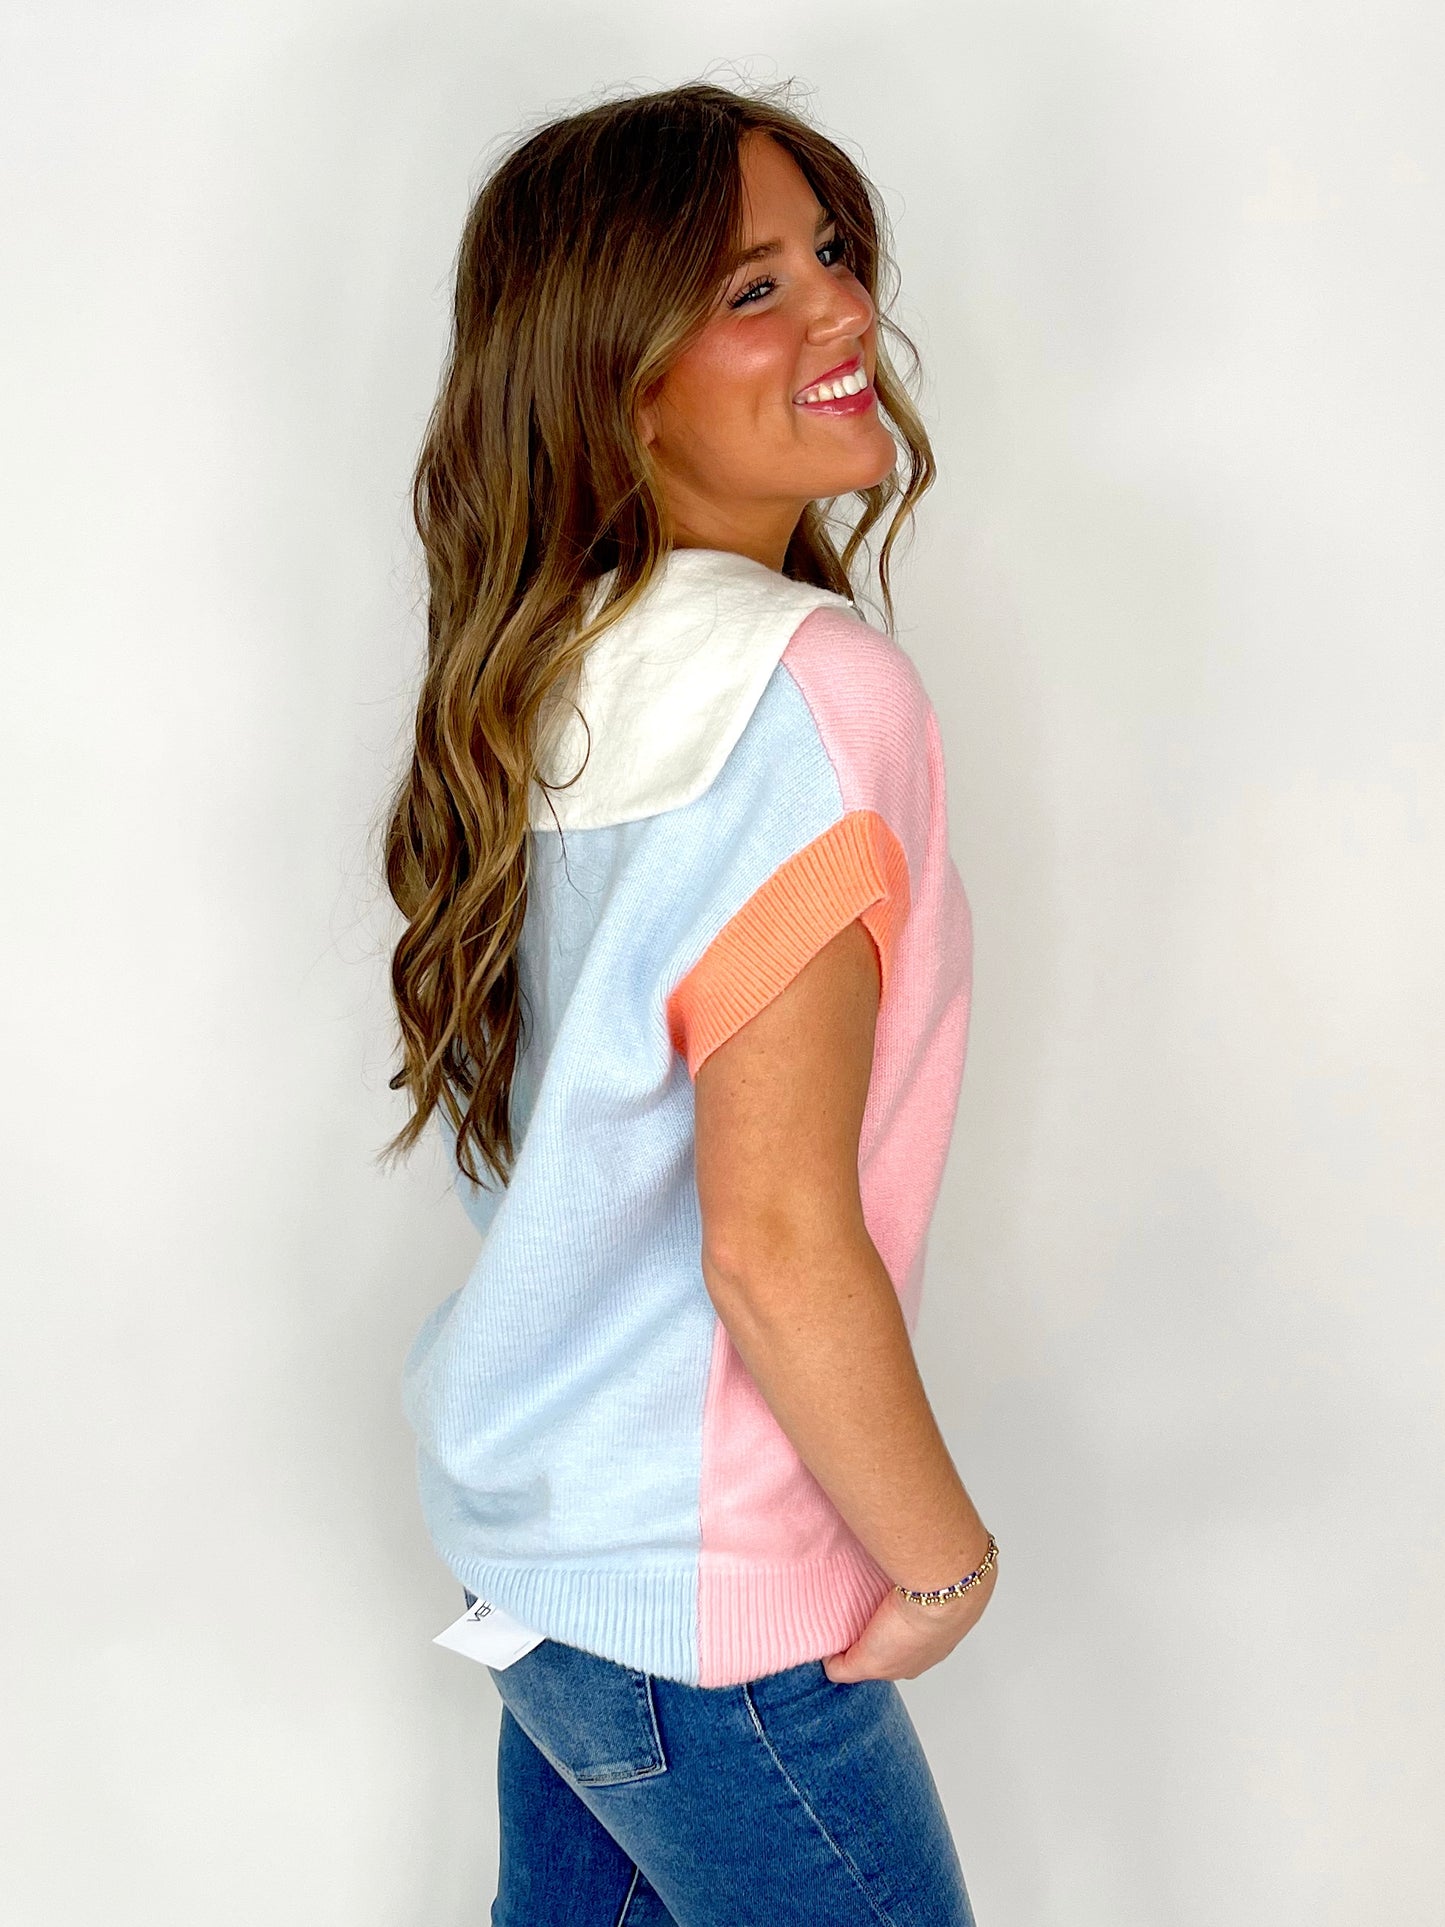 The Winnie Half Zip Vest-Short Sleeves-First Love-The Village Shoppe, Women’s Fashion Boutique, Shop Online and In Store - Located in Muscle Shoals, AL.